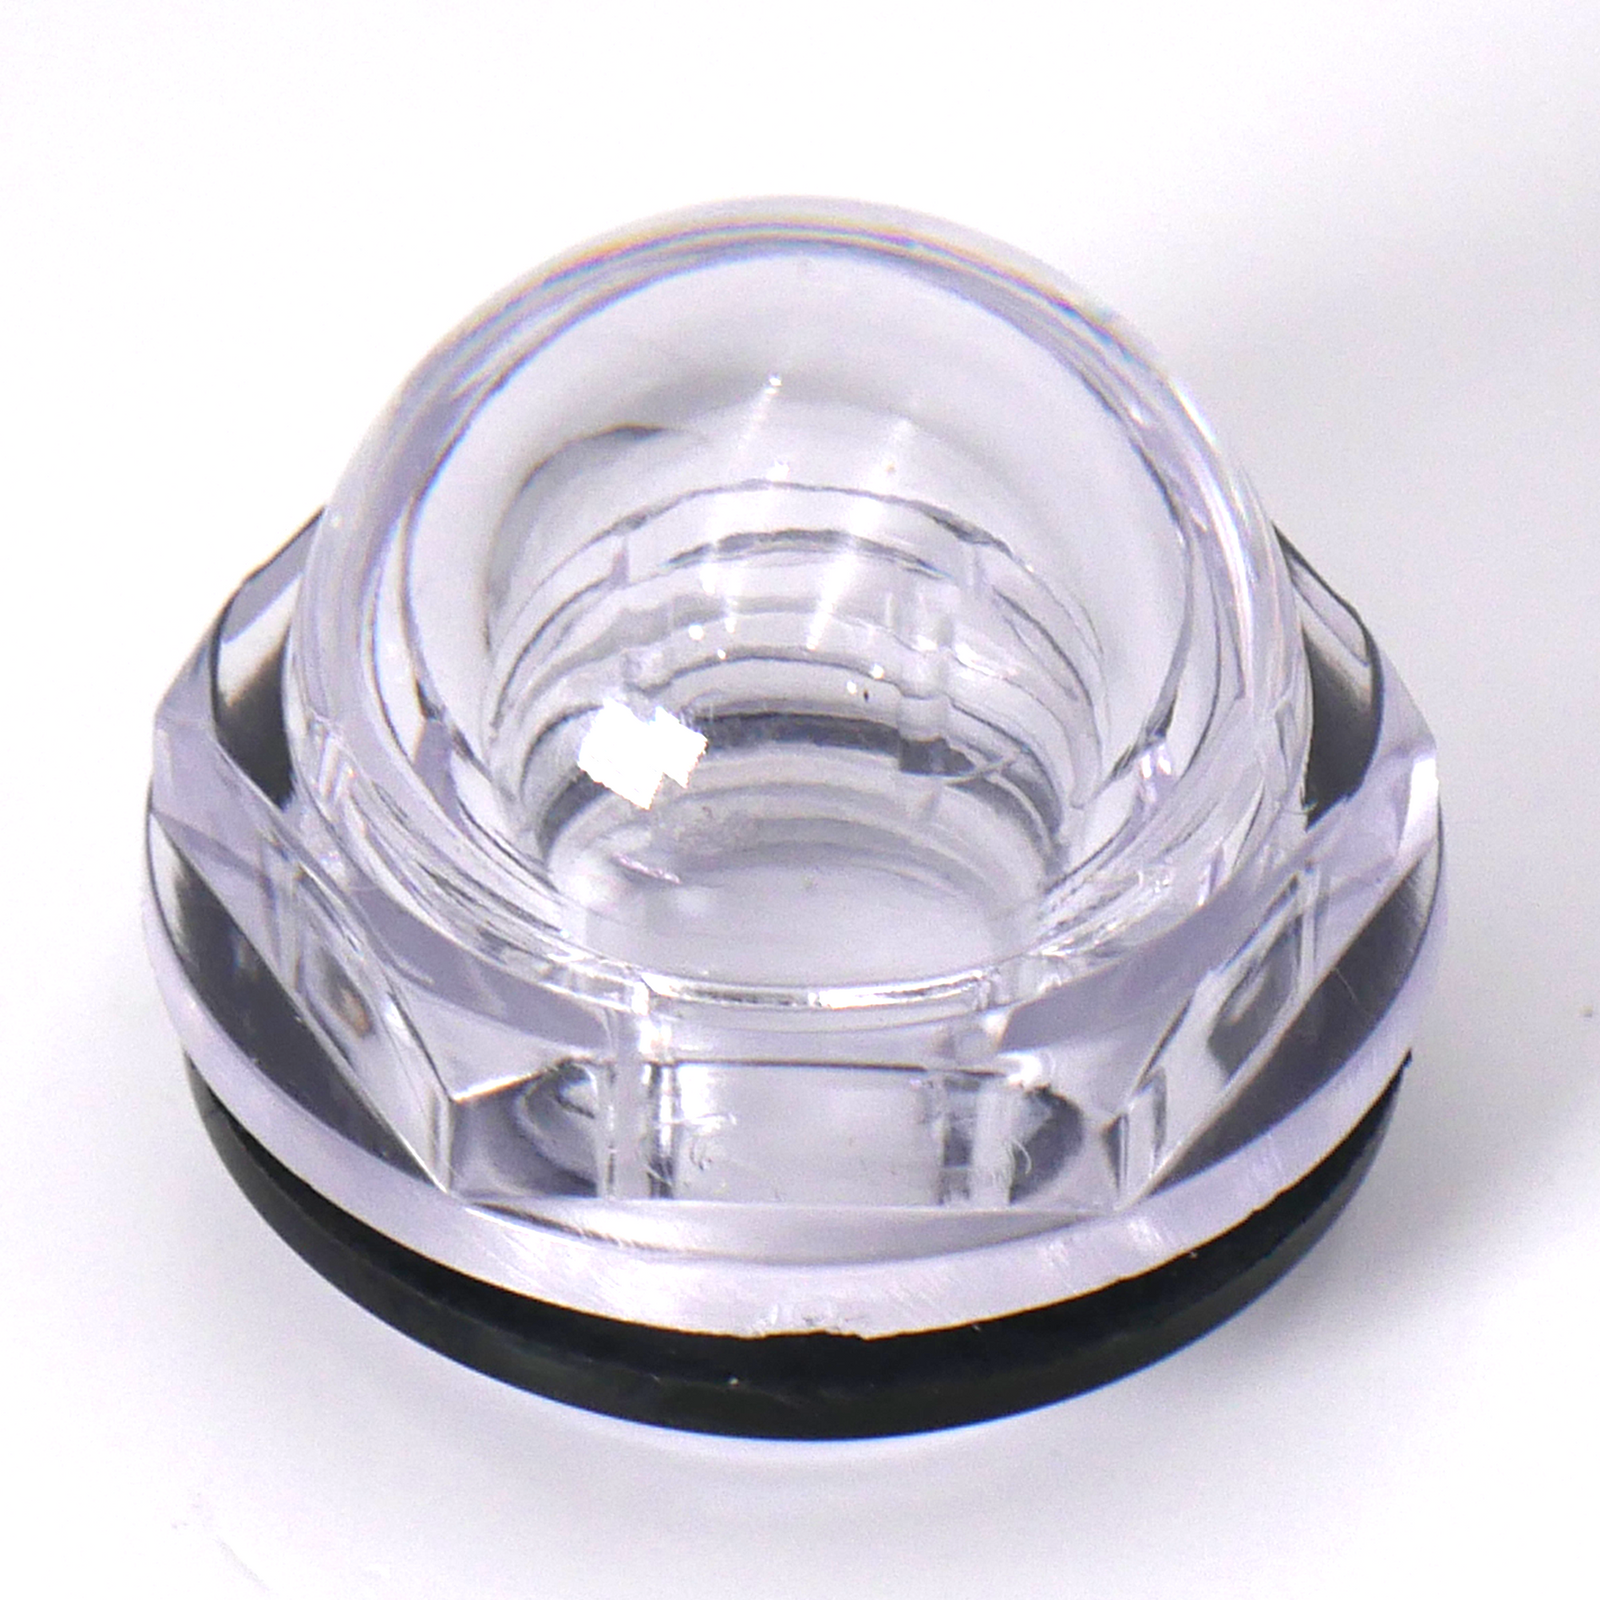 Oil level sight glass part for vacuum sealers